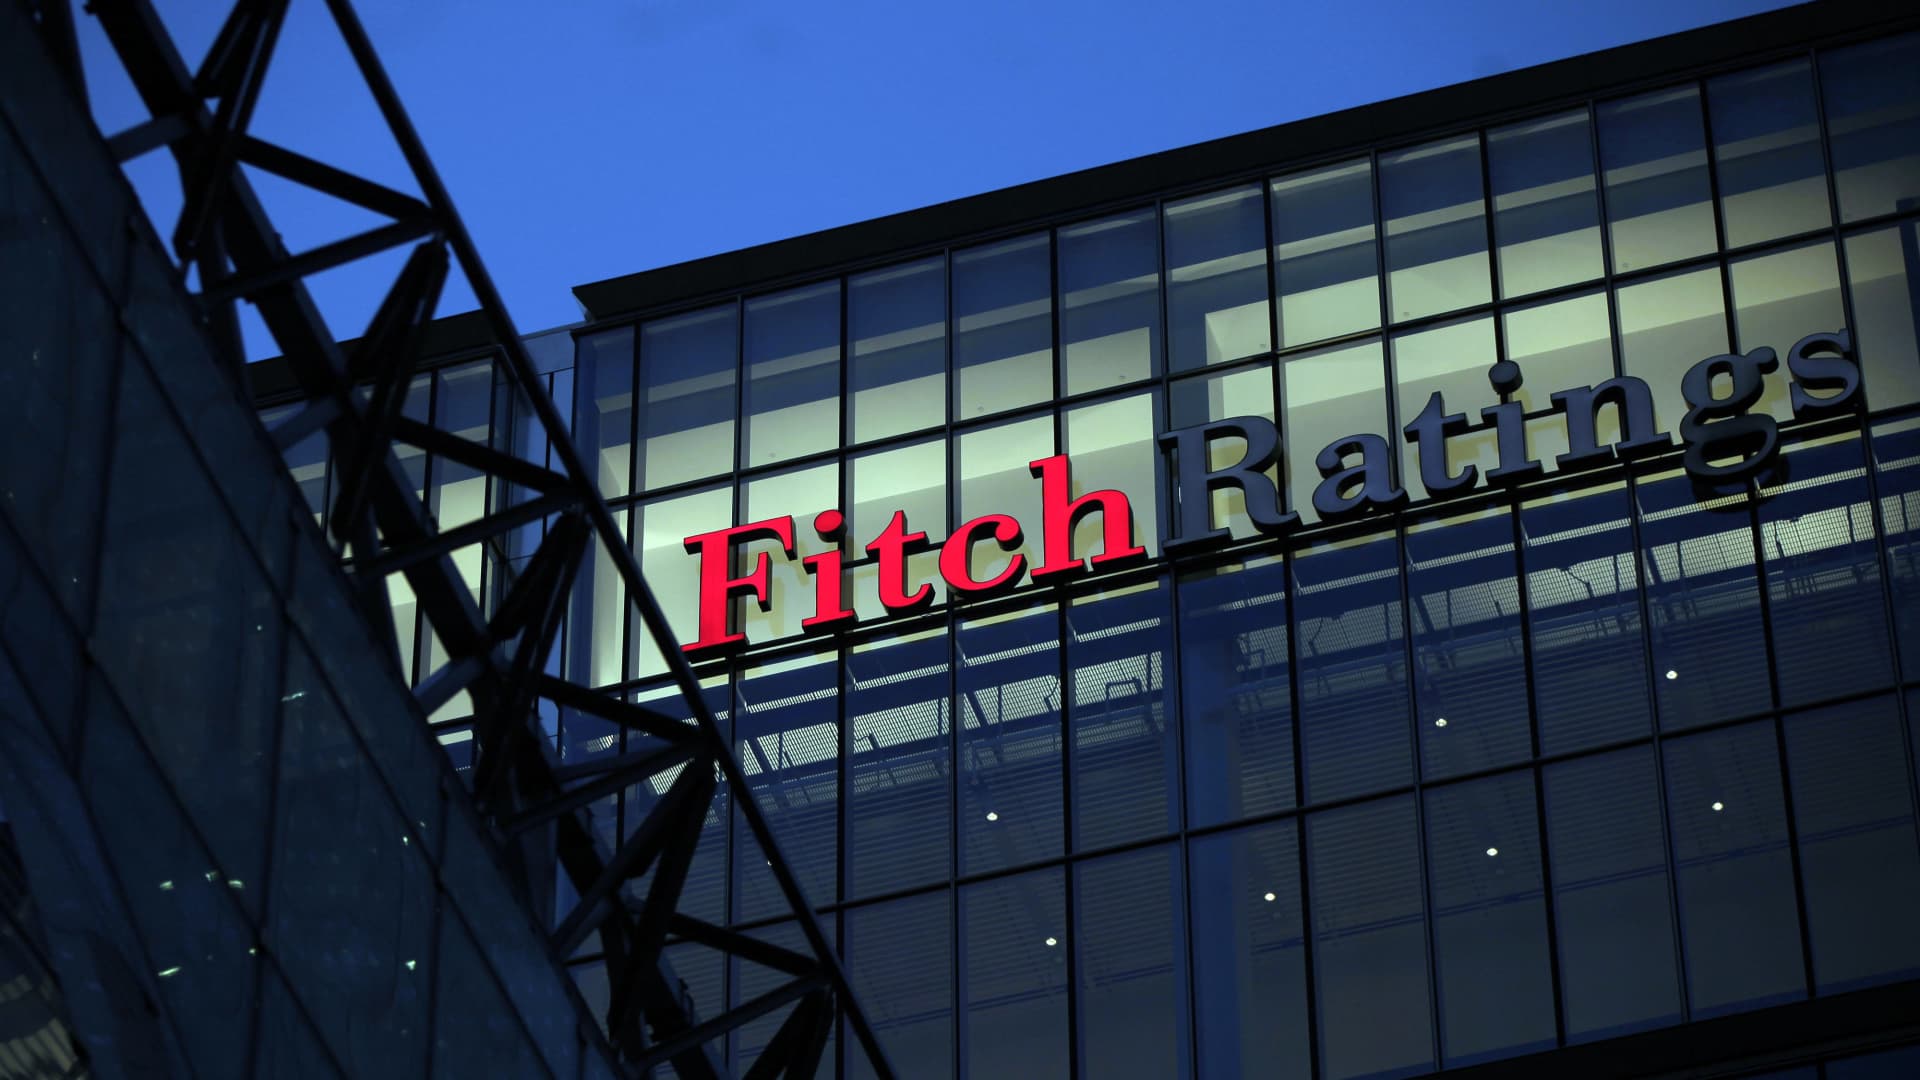 Debt ceiling negotiations intensify as Fitch ratings warning on U.S. credit adds urgency